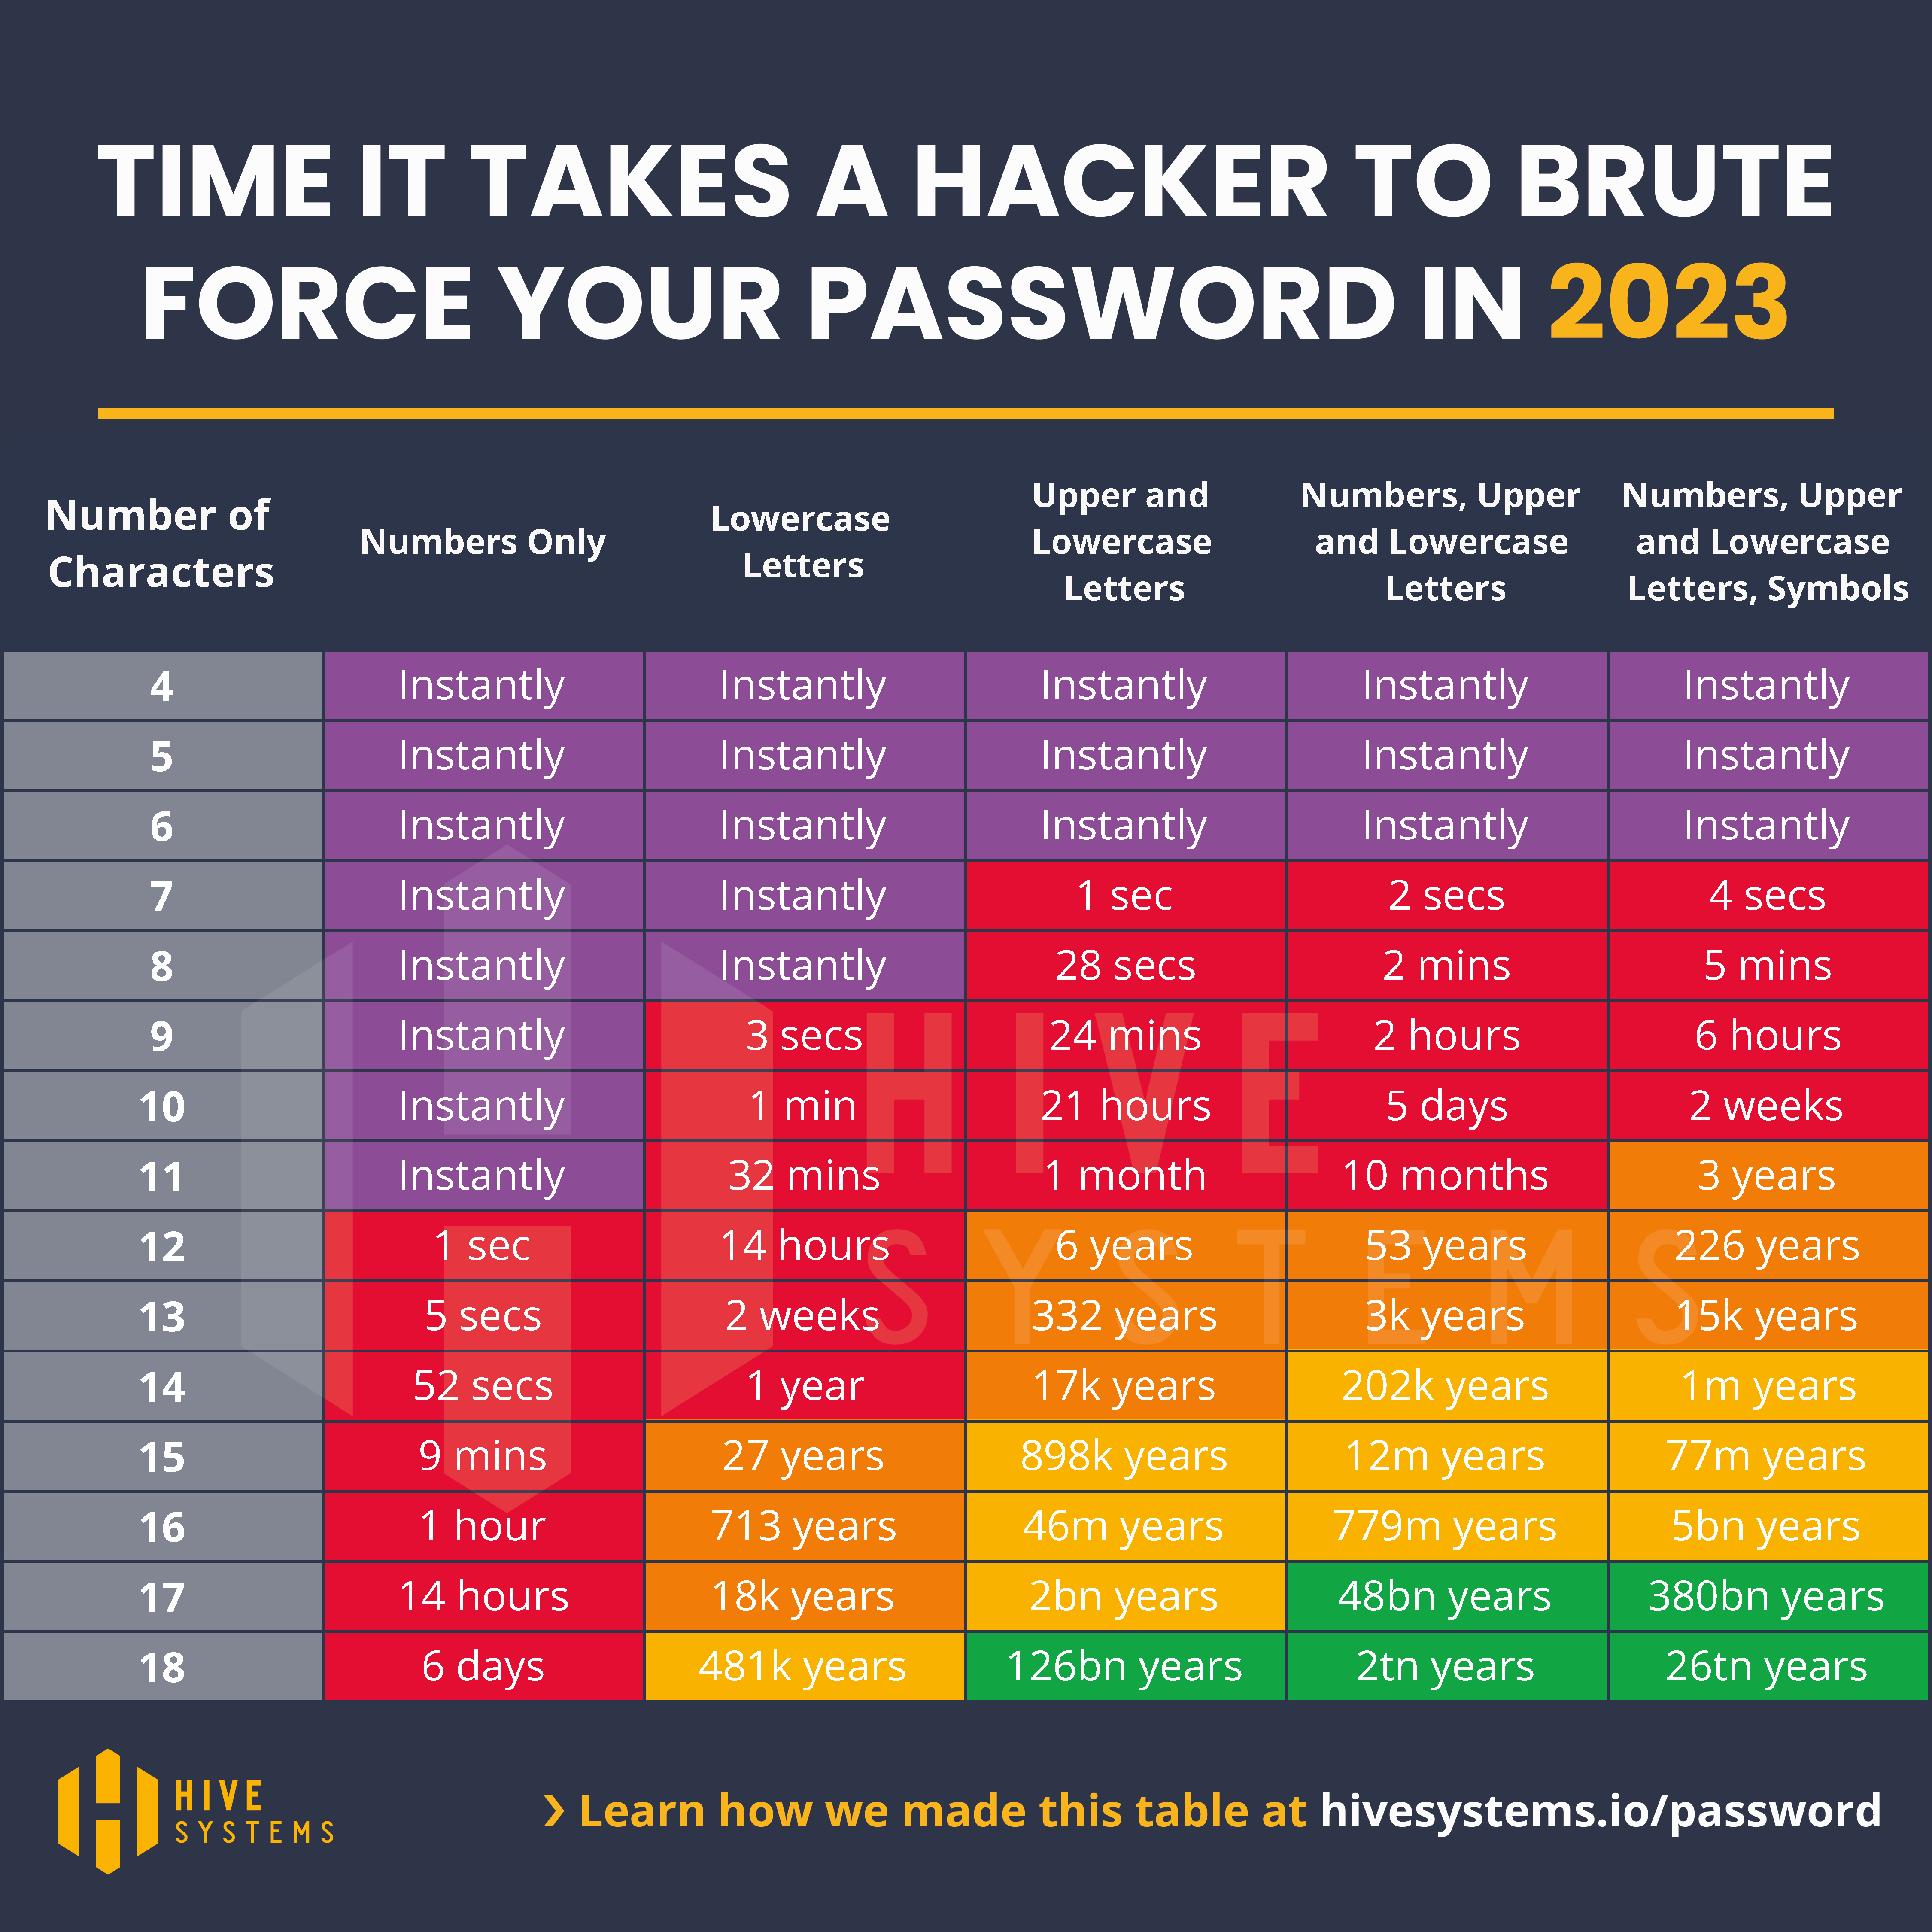 Tiem if takes a hacker to brute force your password in 2023 by HIVE Systems